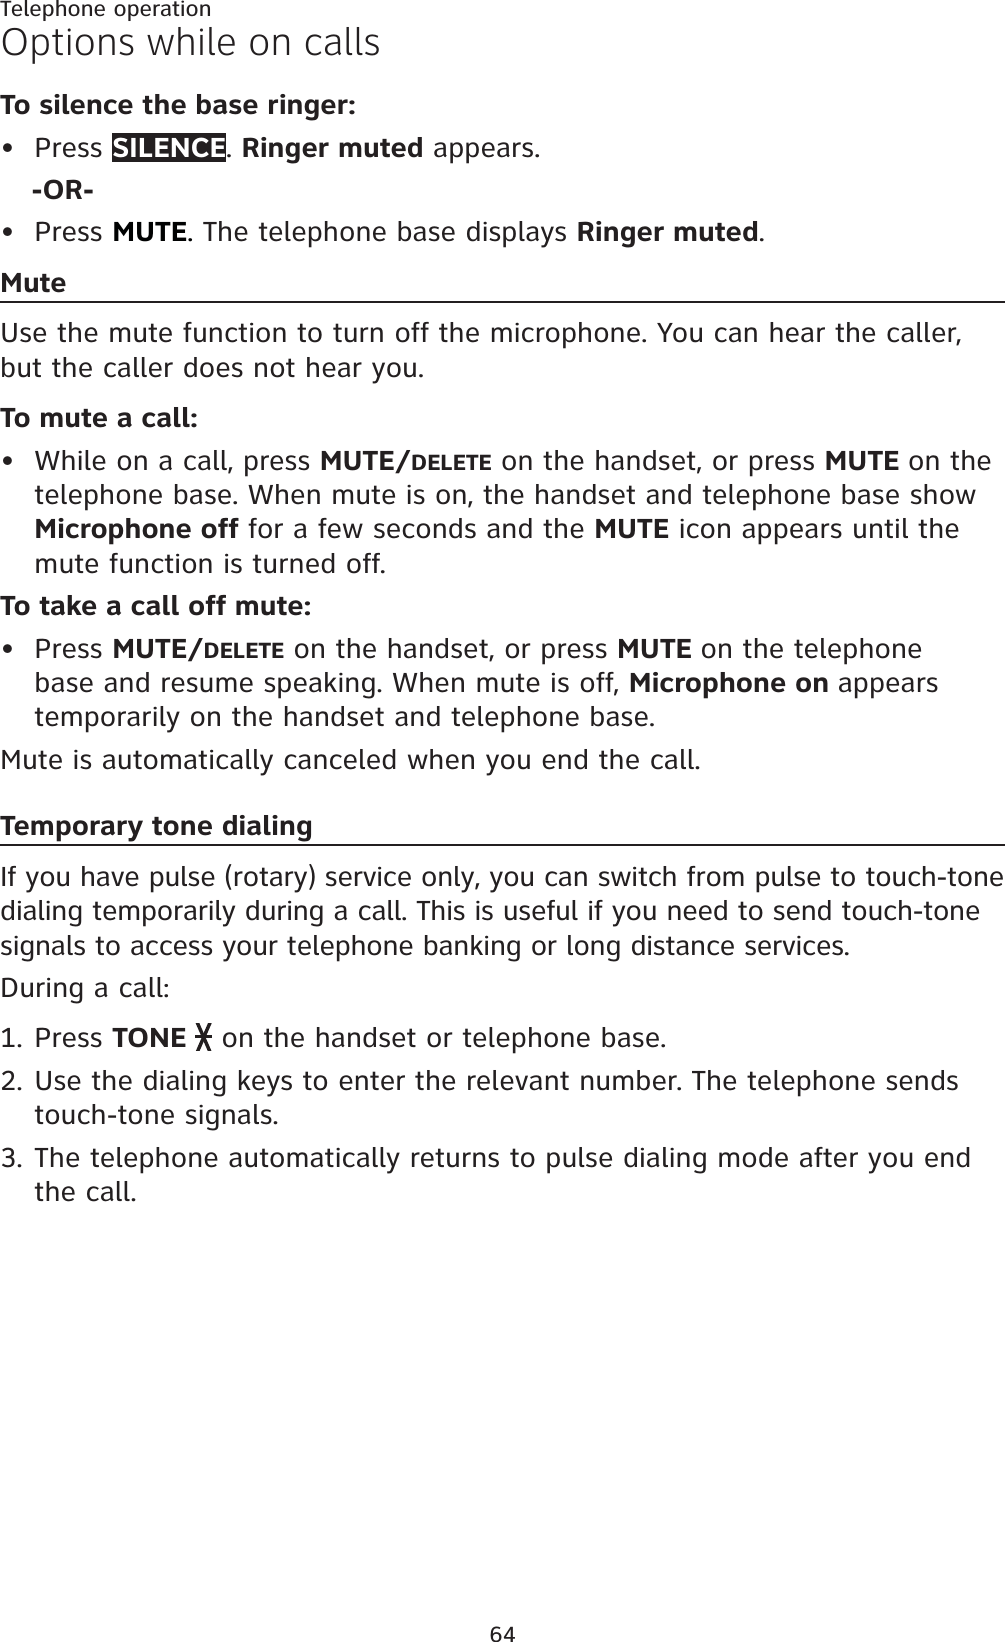 64Telephone operationOptions while on callsTo silence the base ringer:Press SILENCE.Ringer muted appears.-OR-Press MUTE.The telephone base displays Ringer muted.MuteUse the mute function to turn off the microphone. You can hear the caller, but the caller does not hear you.To mute a call:While on a call, press MUTE/DELETE on the handset, or press MUTE on the telephone base. When mute is on, the handset and telephone base show Microphone off for a few seconds and the MUTE icon appears until the mute function is turned off.To take a call off mute:Press MUTE/DELETE on the handset, or press MUTE on the telephone base and resume speaking. When mute is off, Microphone on appears temporarily on the handset and telephone base.Mute is automatically canceled when you end the call.Temporary tone dialingIf you have pulse (rotary) service only, you can switch from pulse to touch-tone dialing temporarily during a call. This is useful if you need to send touch-tone signals to access your telephone banking or long distance services.During a call:Press TONE   on the handset or telephone base.Use the dialing keys to enter the relevant number. The telephone sends touch-tone signals.The telephone automatically returns to pulse dialing mode after you end the call.••••1.2.3.